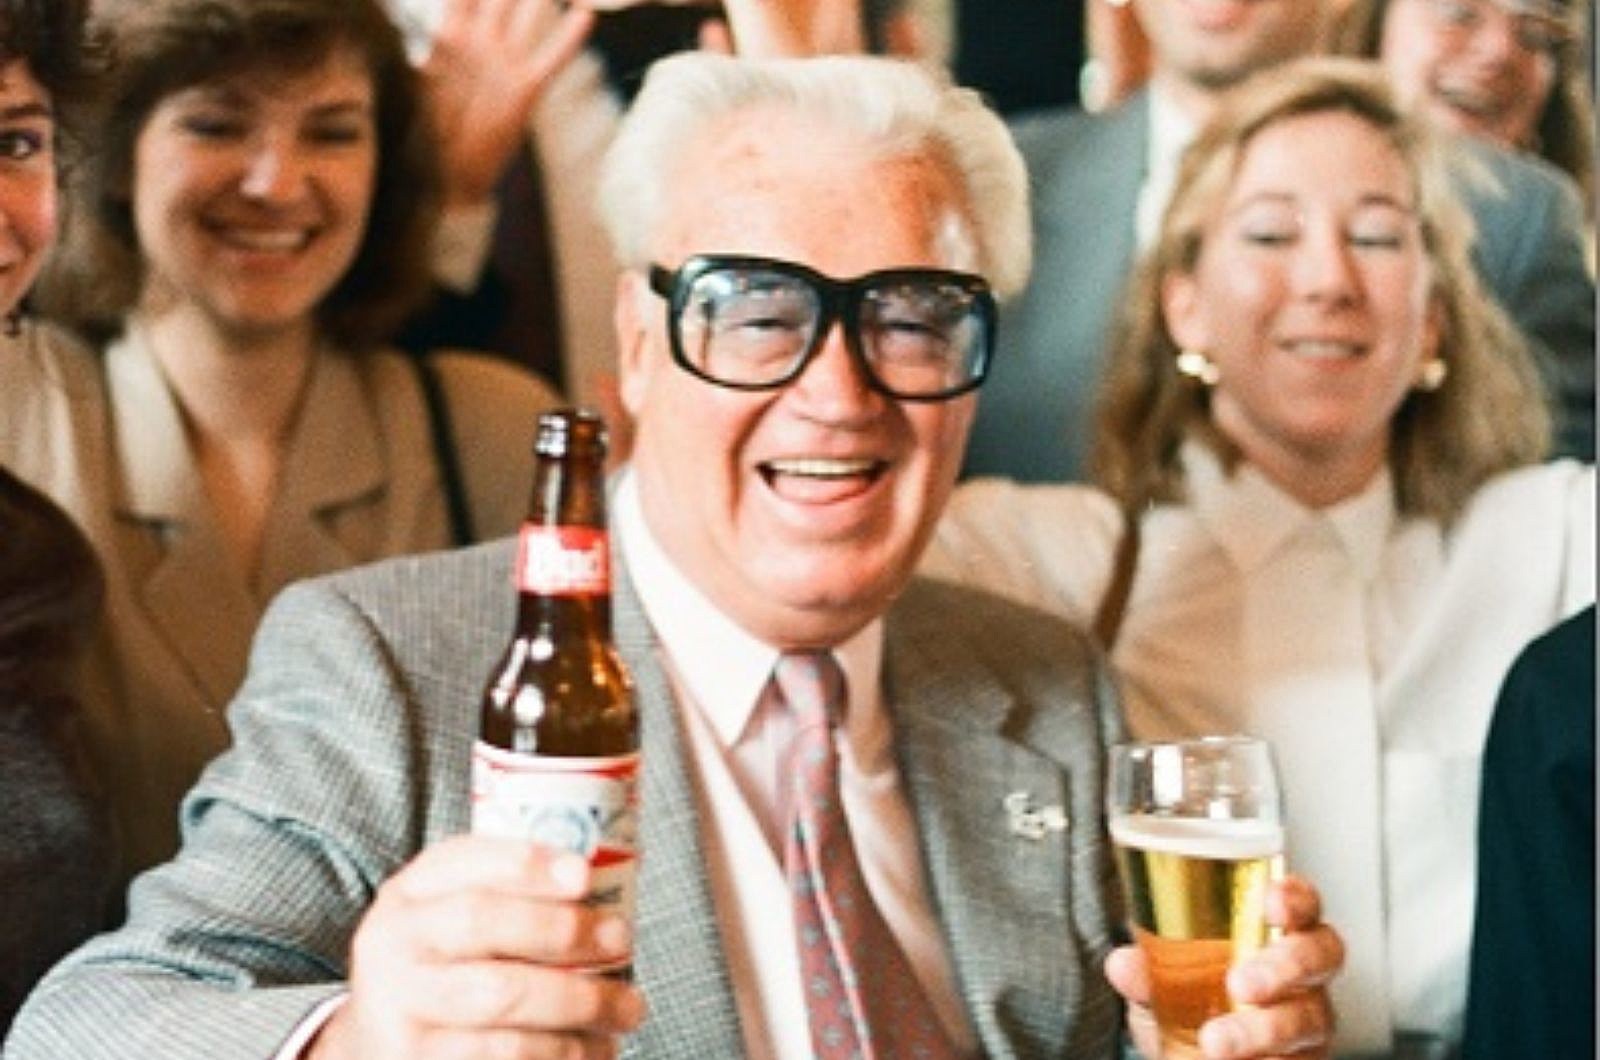 Harry Caray, this Bud's for you.